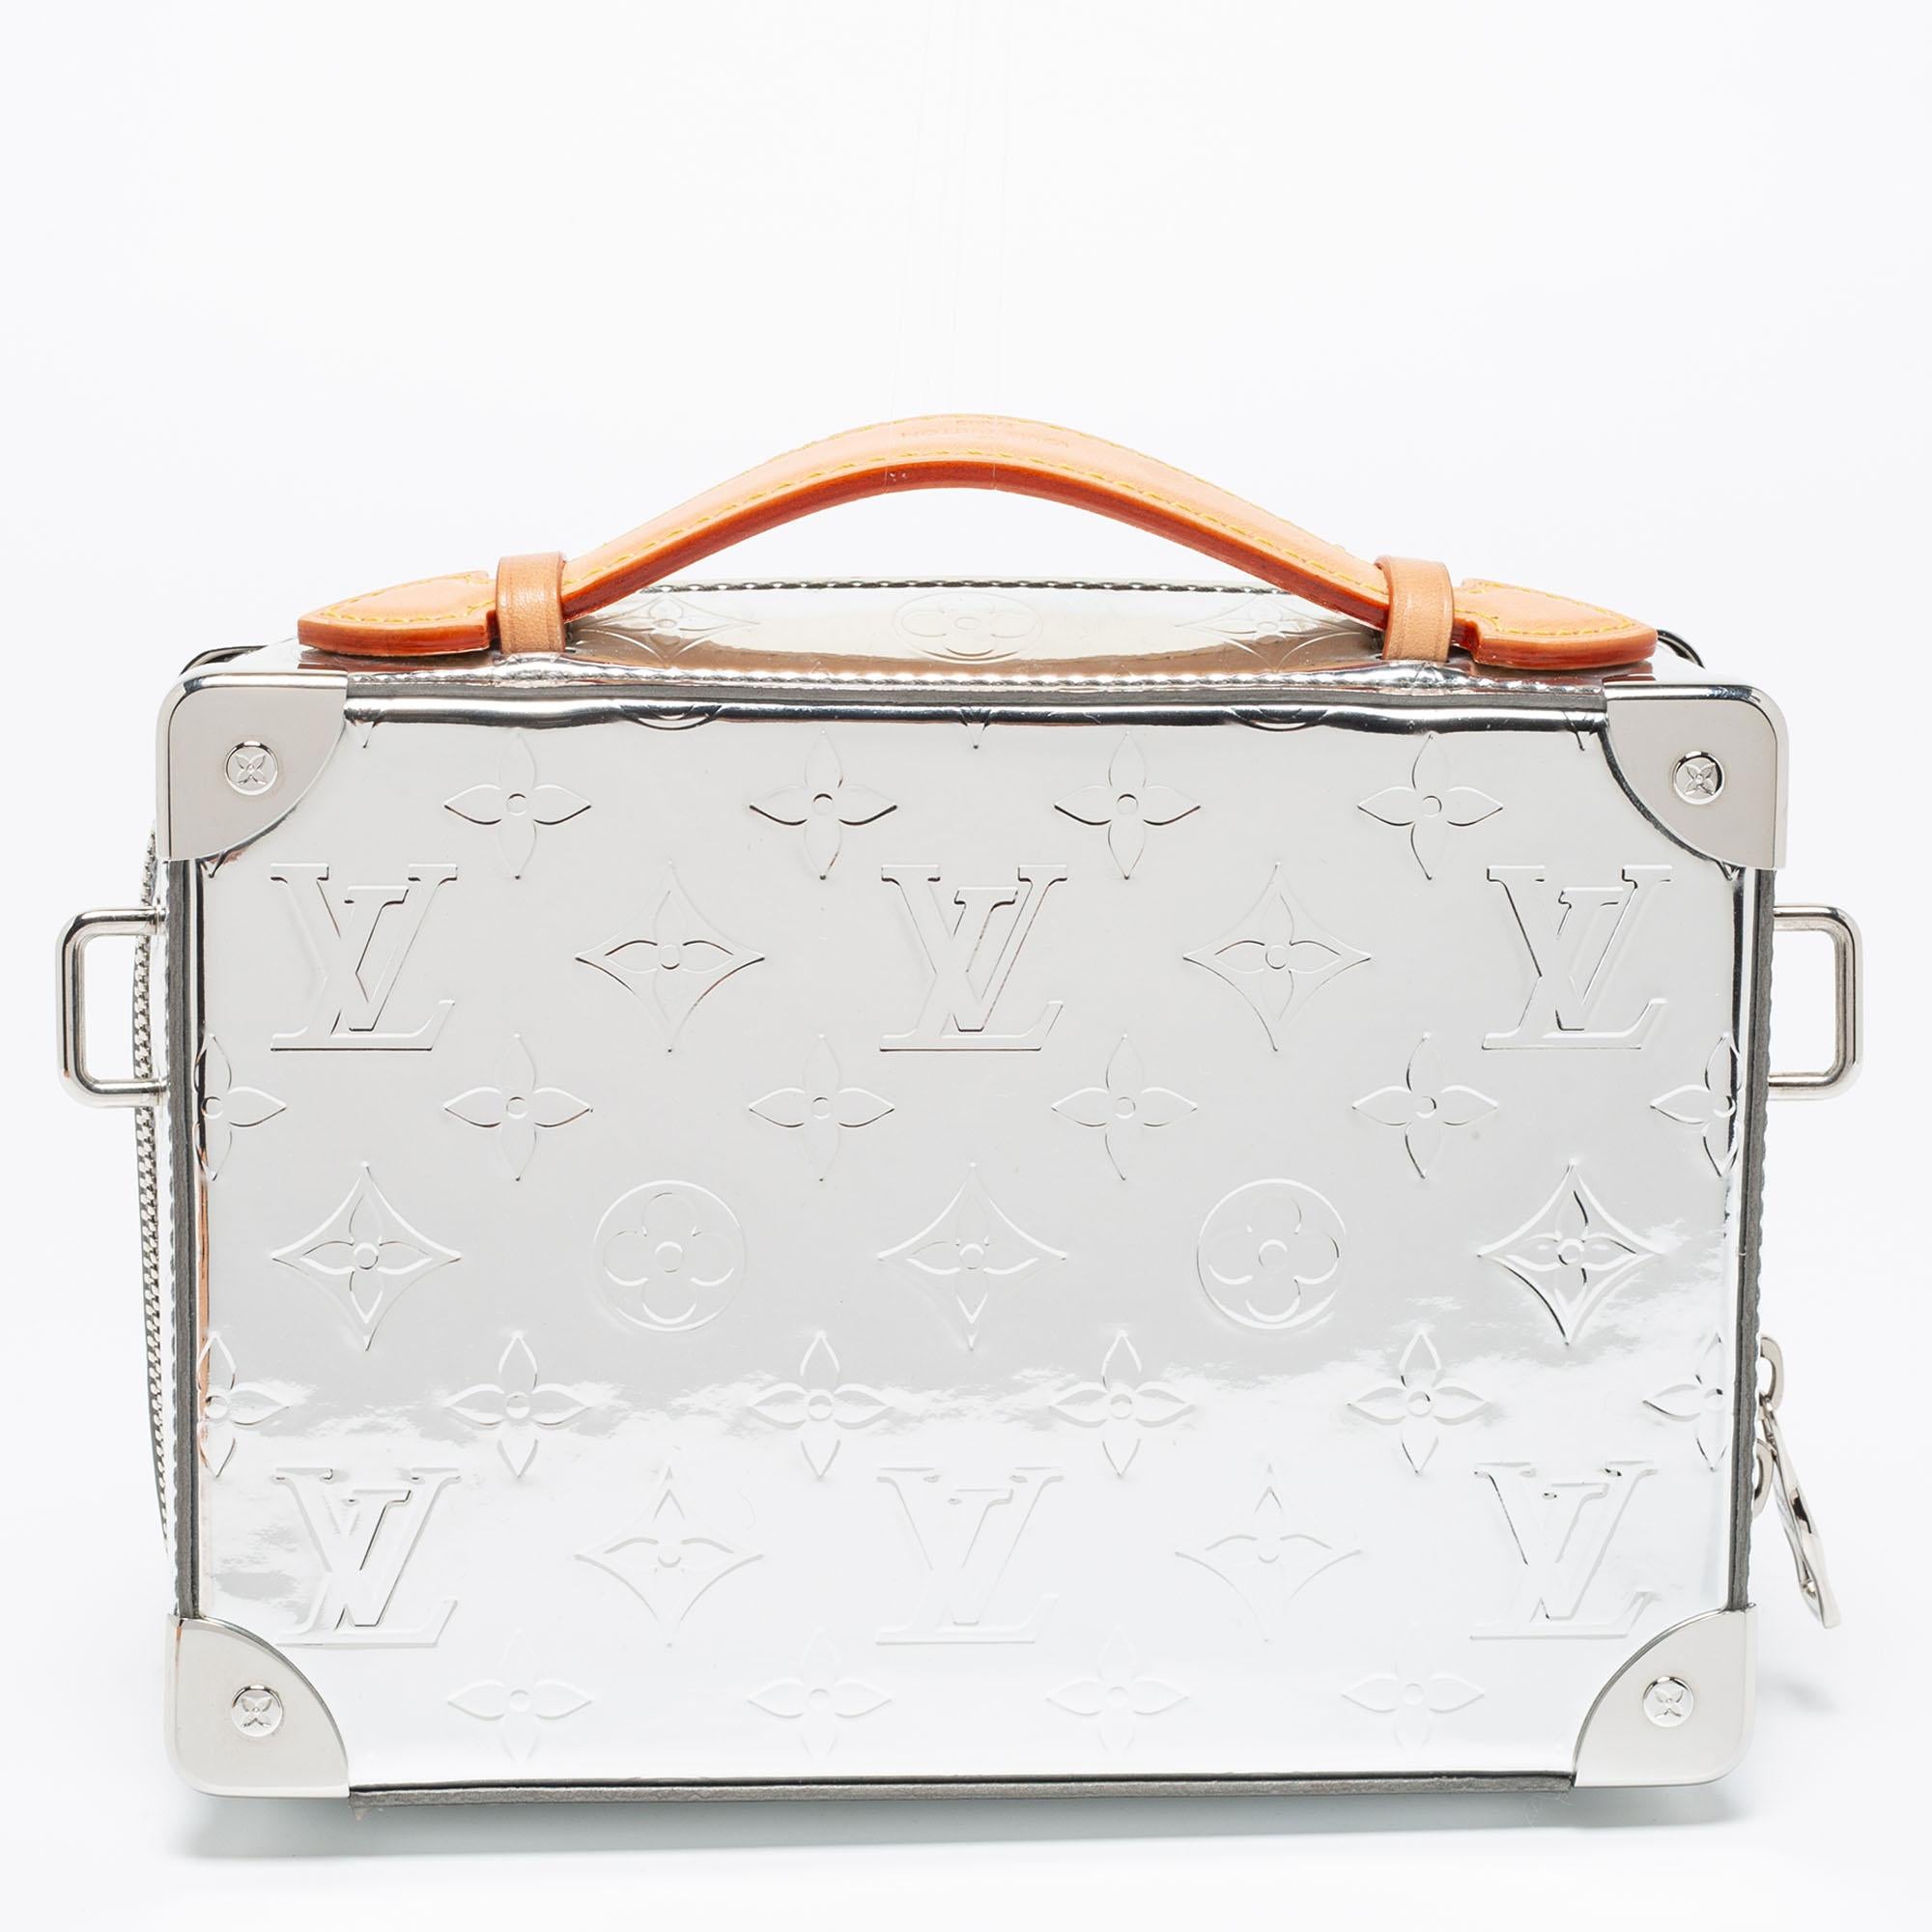 Louis Vuitton's Handle Trunk bag has a modern appeal and a functional quality. Constructed using Mirrored Monogram, the bag has a top handle, a shoulder strap, and a fabric-lined interior.

Includes: Original Dustbag, Original Box, Detachable Strap